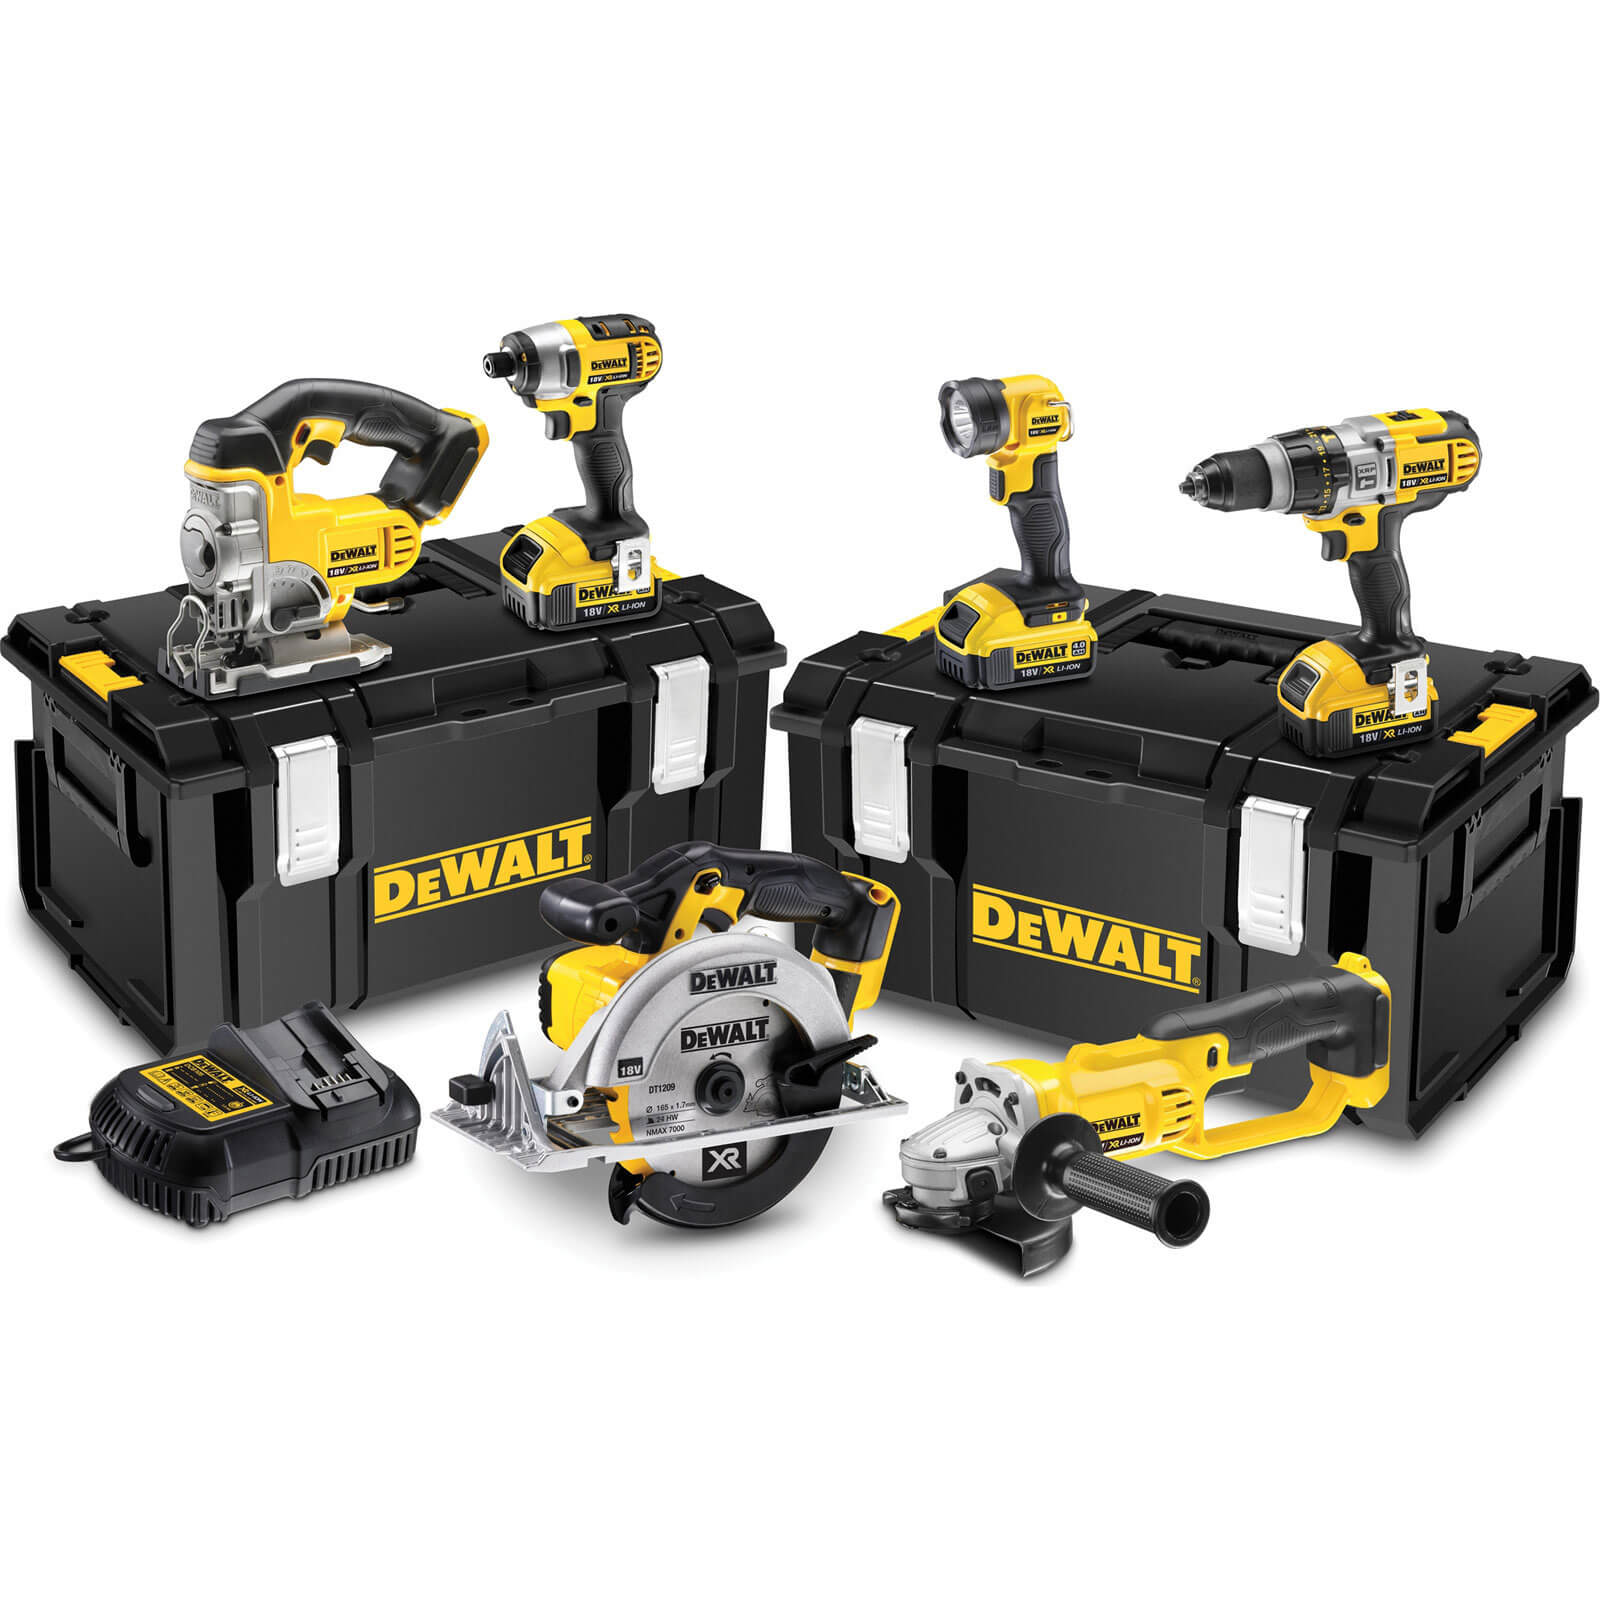 DeWalt DCK692M3 18v Cordless XR 6 Piece Power Tool Kit with 3 Speed Combi with 3 Lithium Ion Batteri